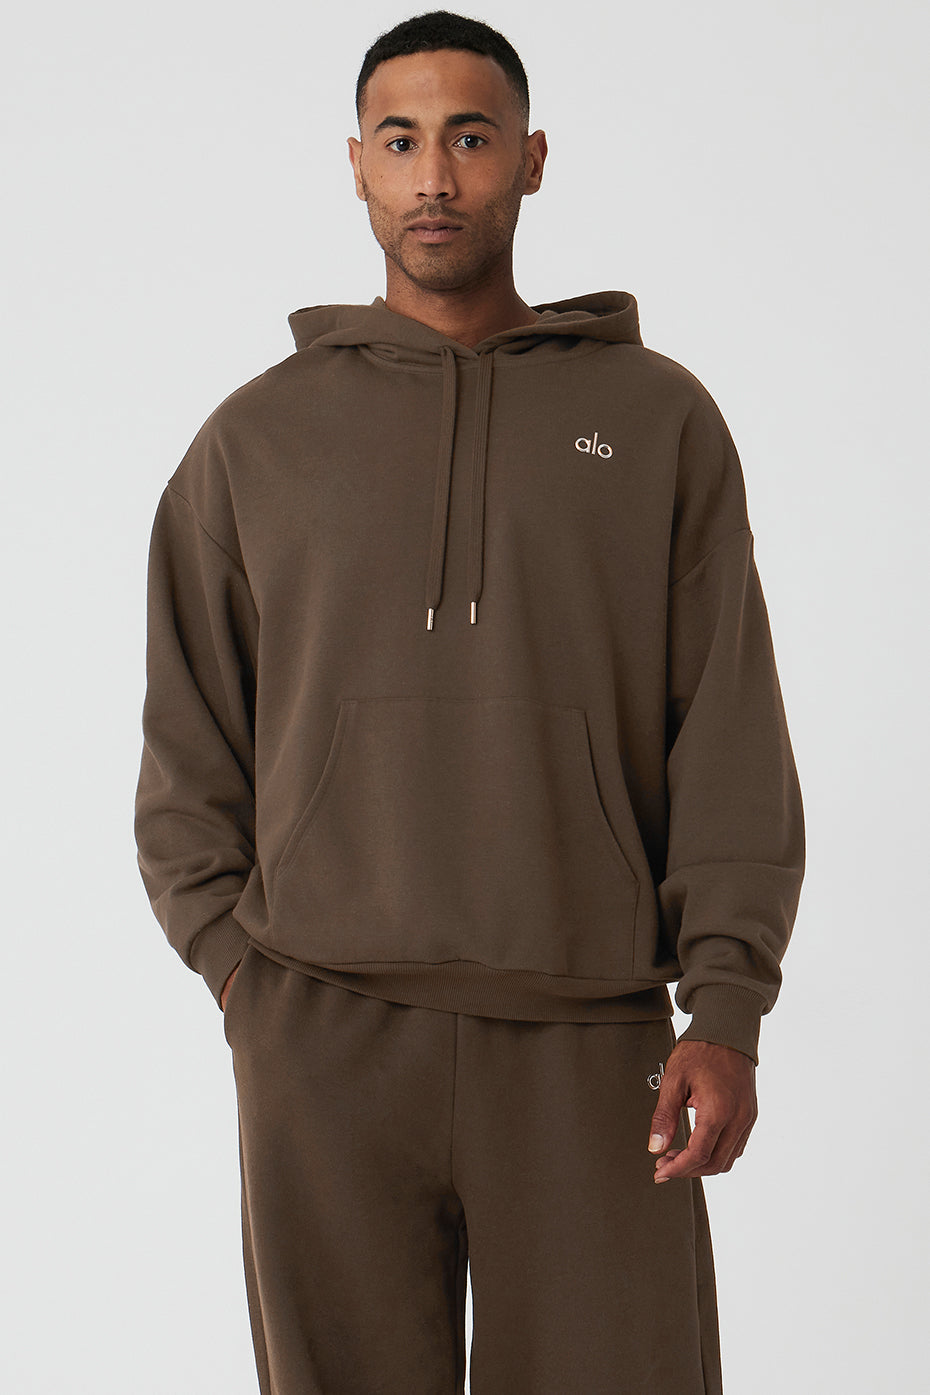 New In Alo Yoga Accolade Hoodie For Men Espresso from the fresh